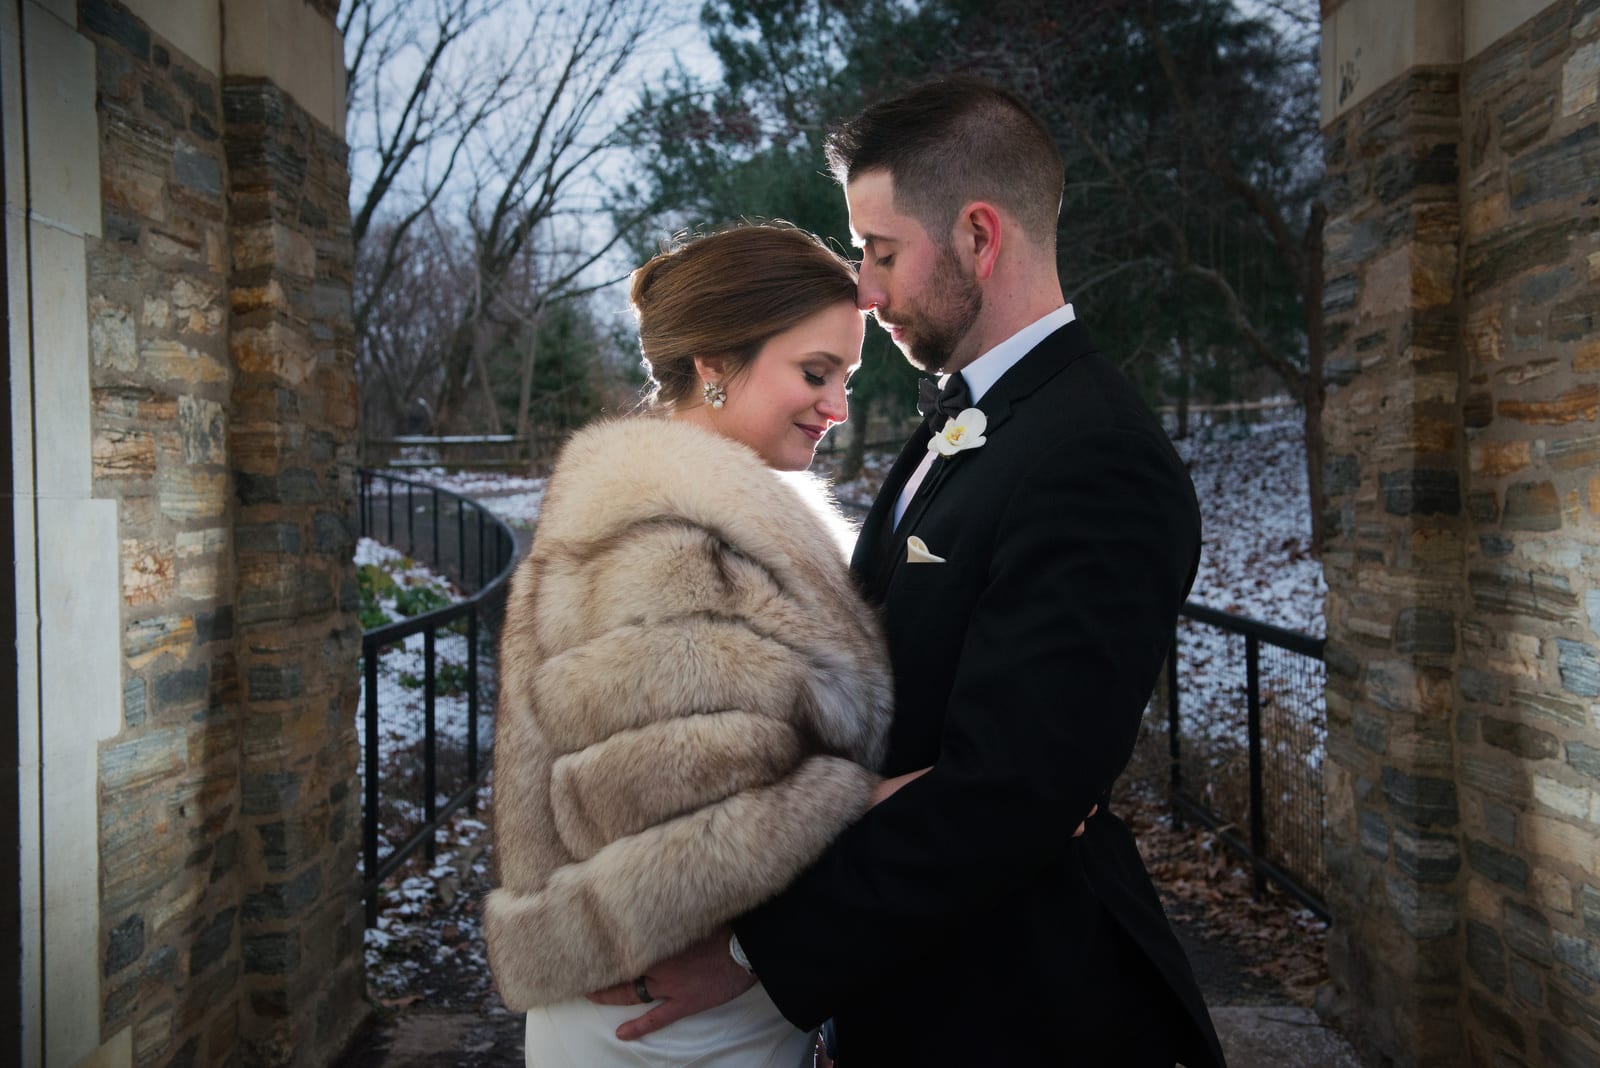 A bride and groom embrace in a stone archway during a chilly winter evening. The bride is wearing a fur stole.